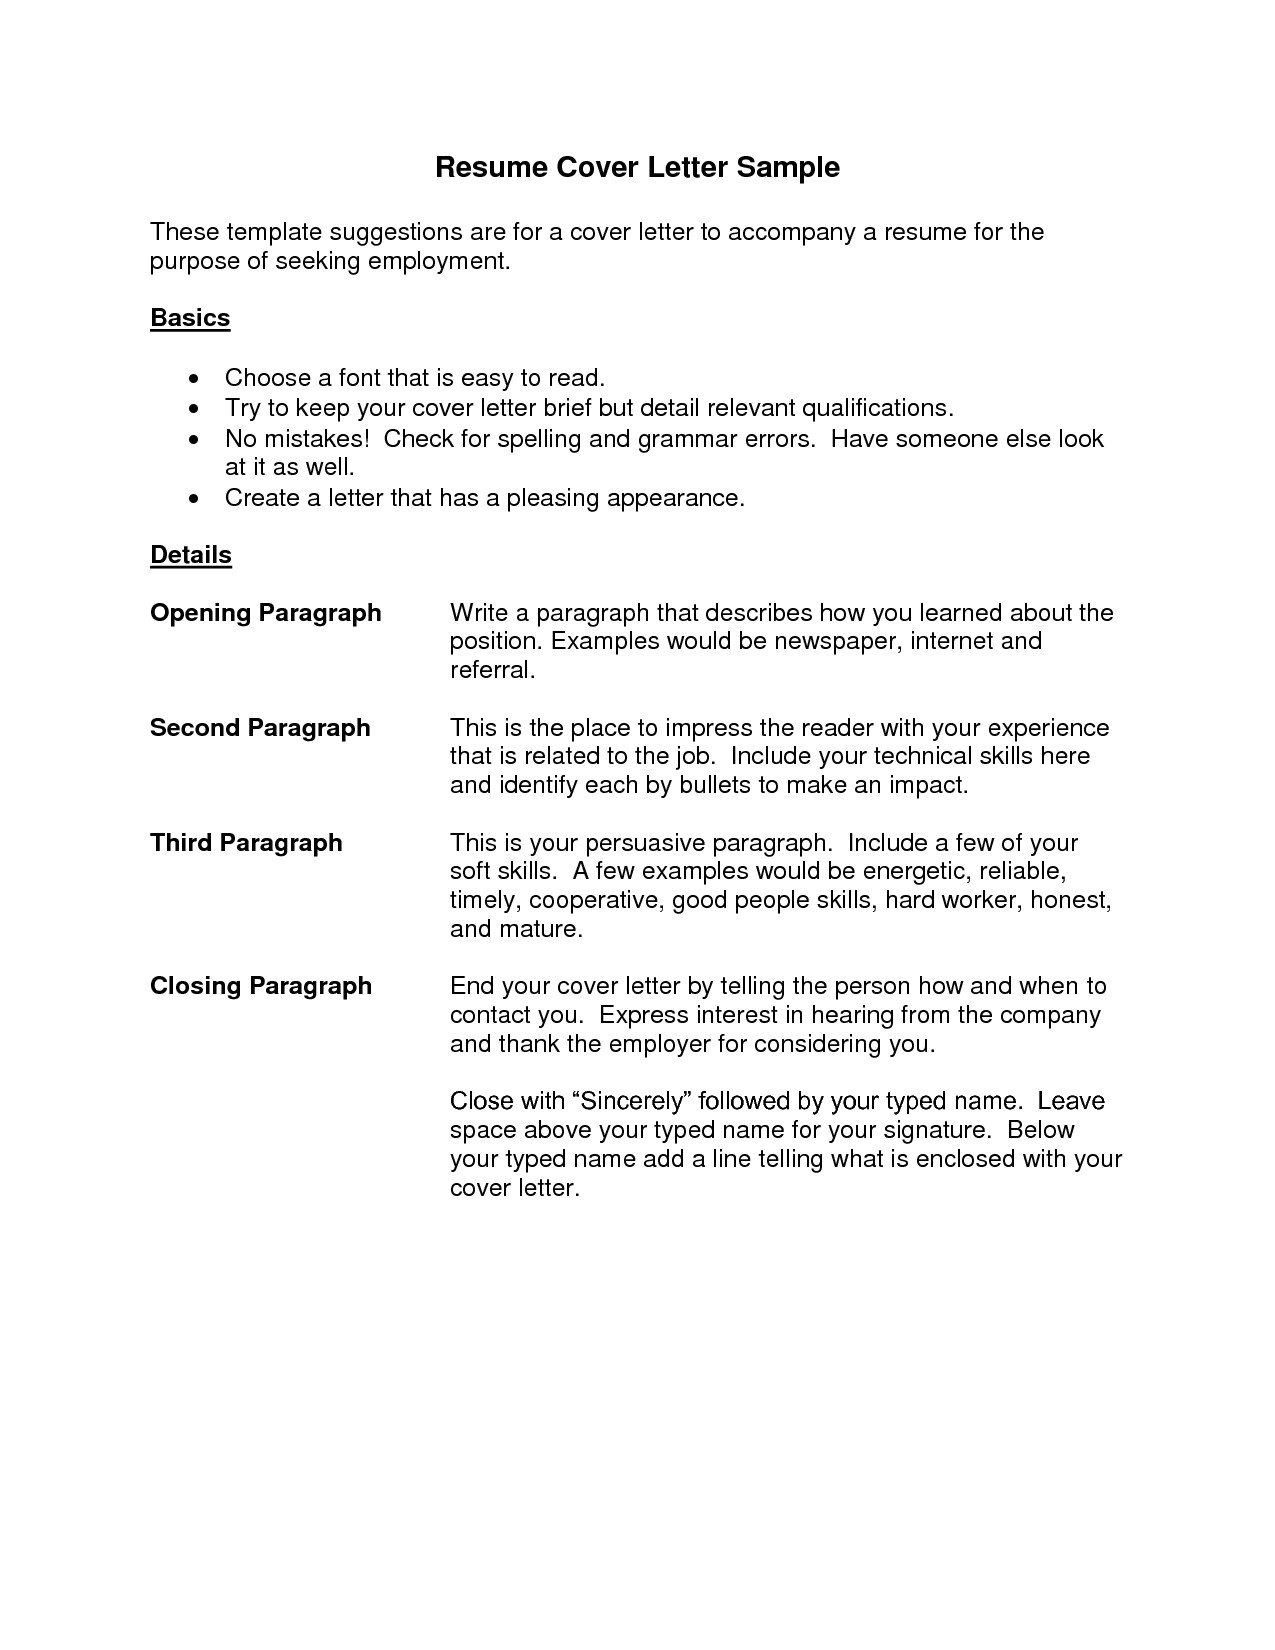 example of cover letter for resume template